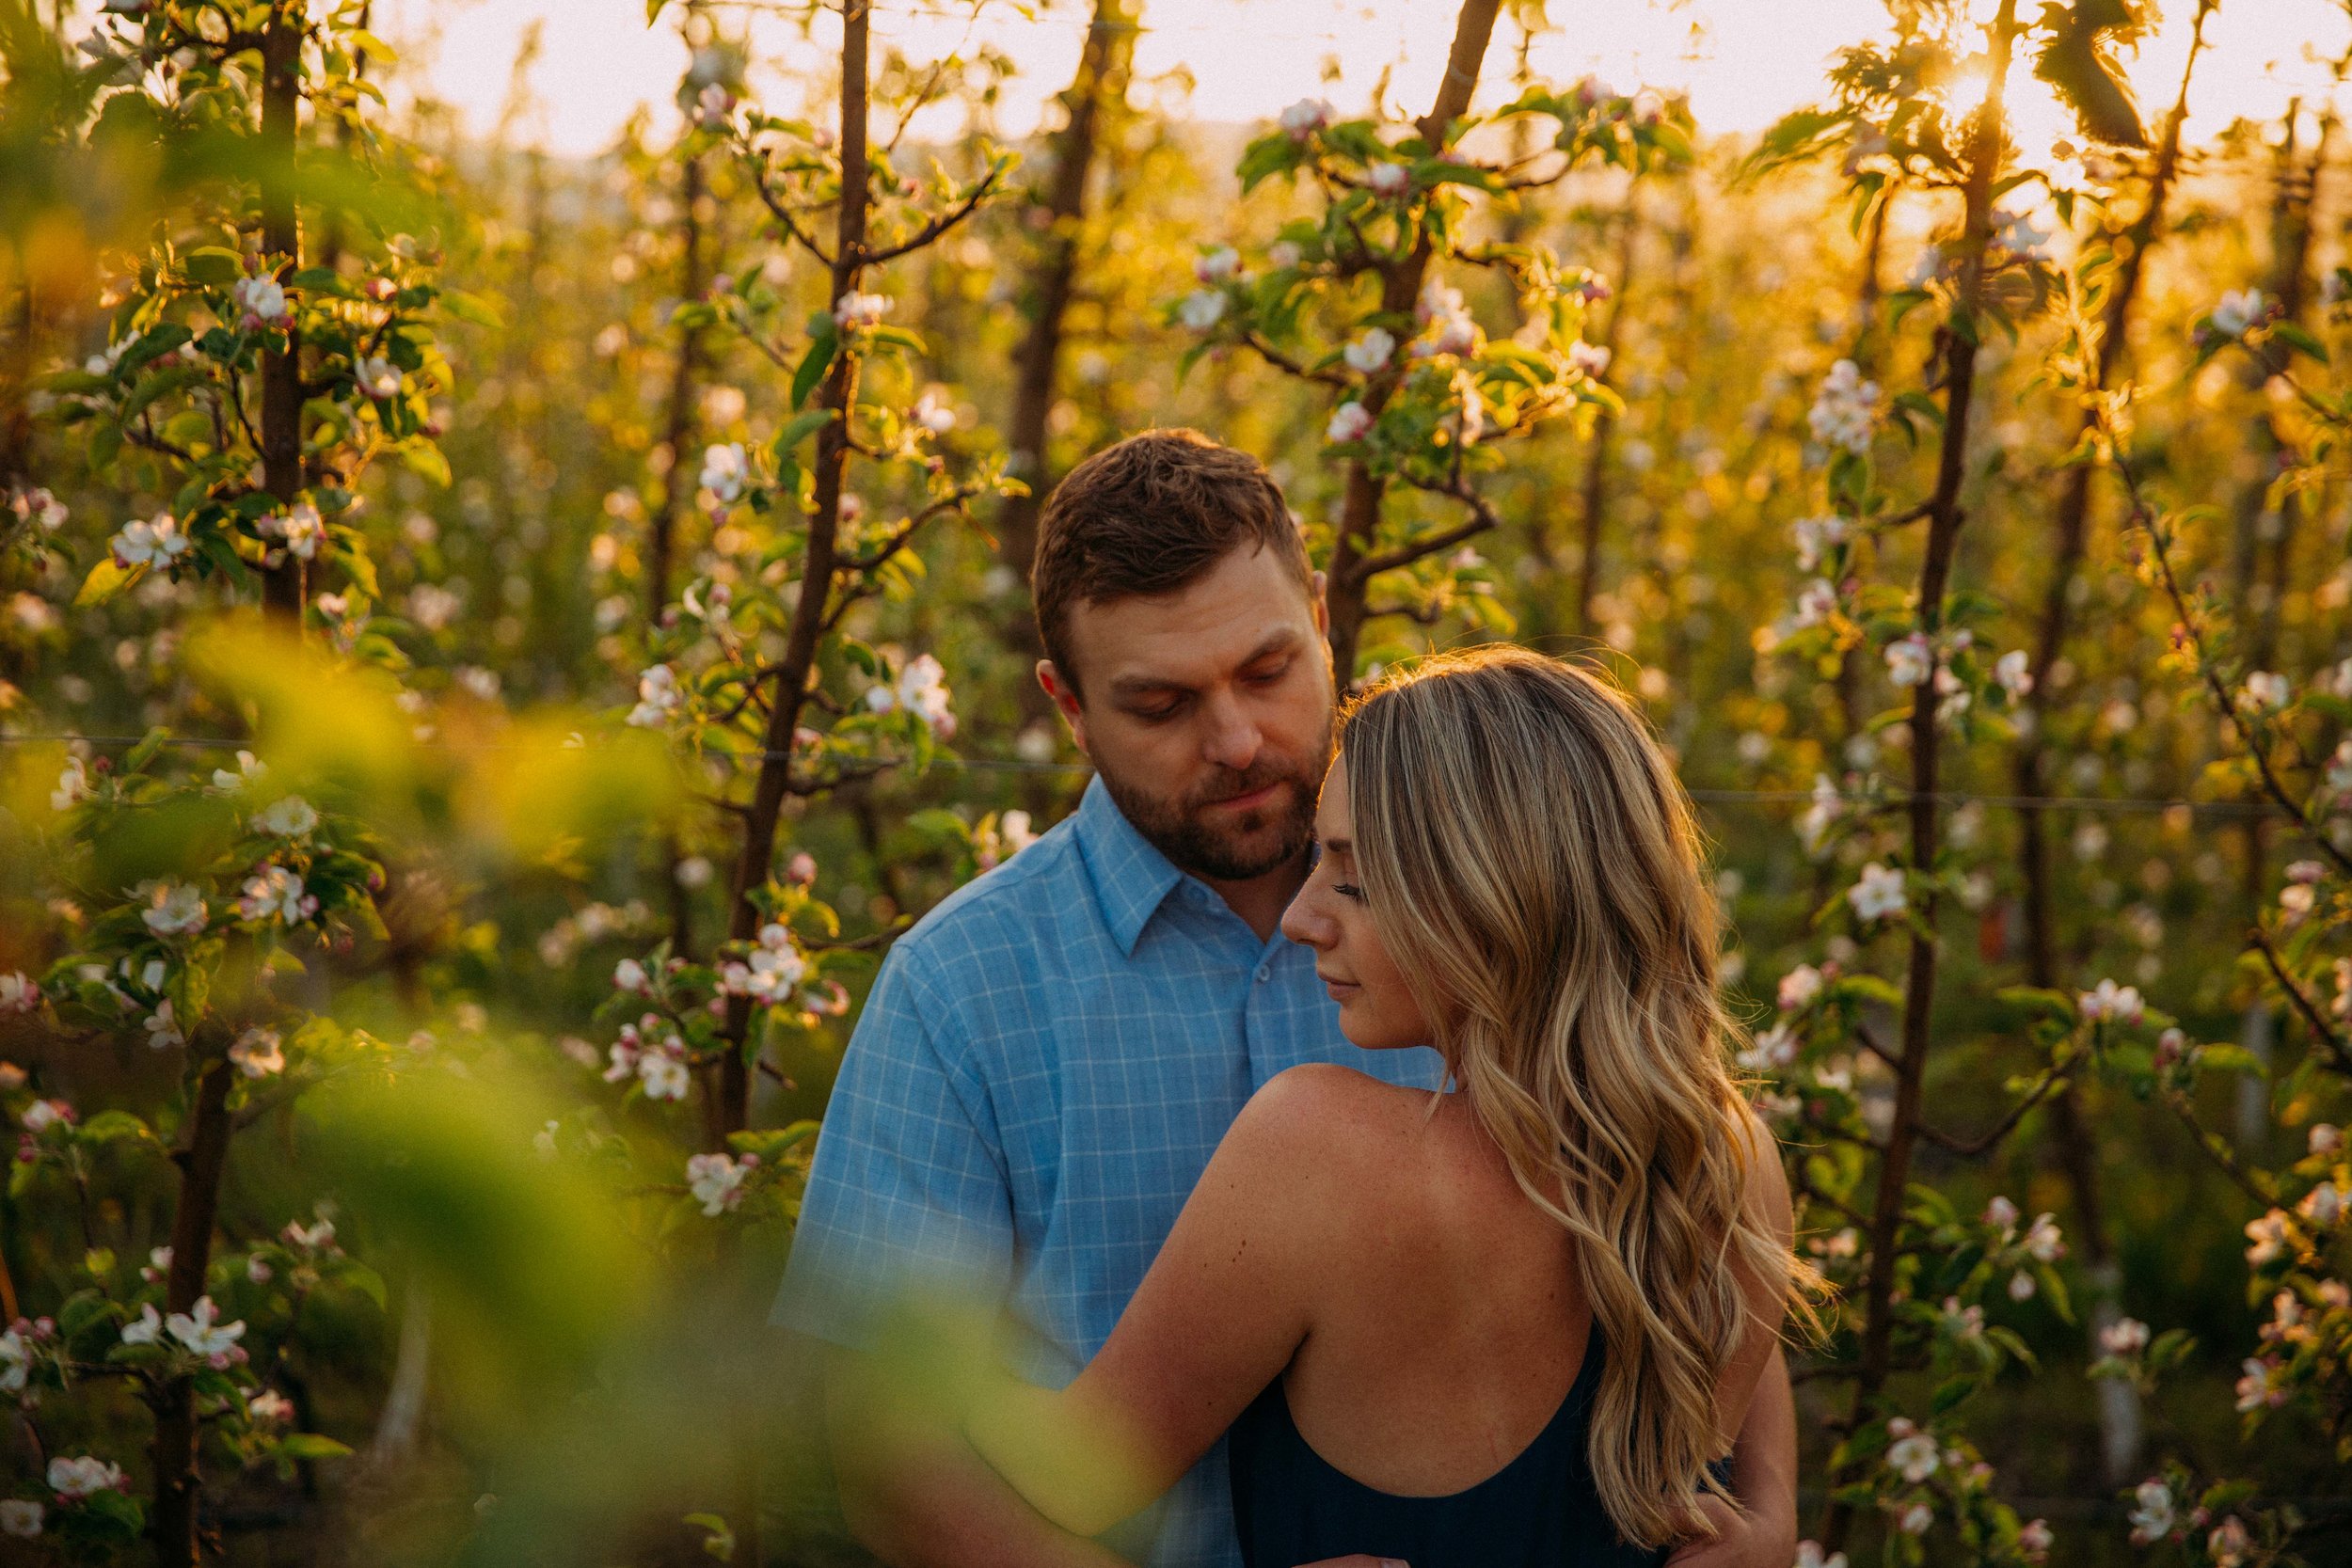 Apple tree engagement session in Kelowna